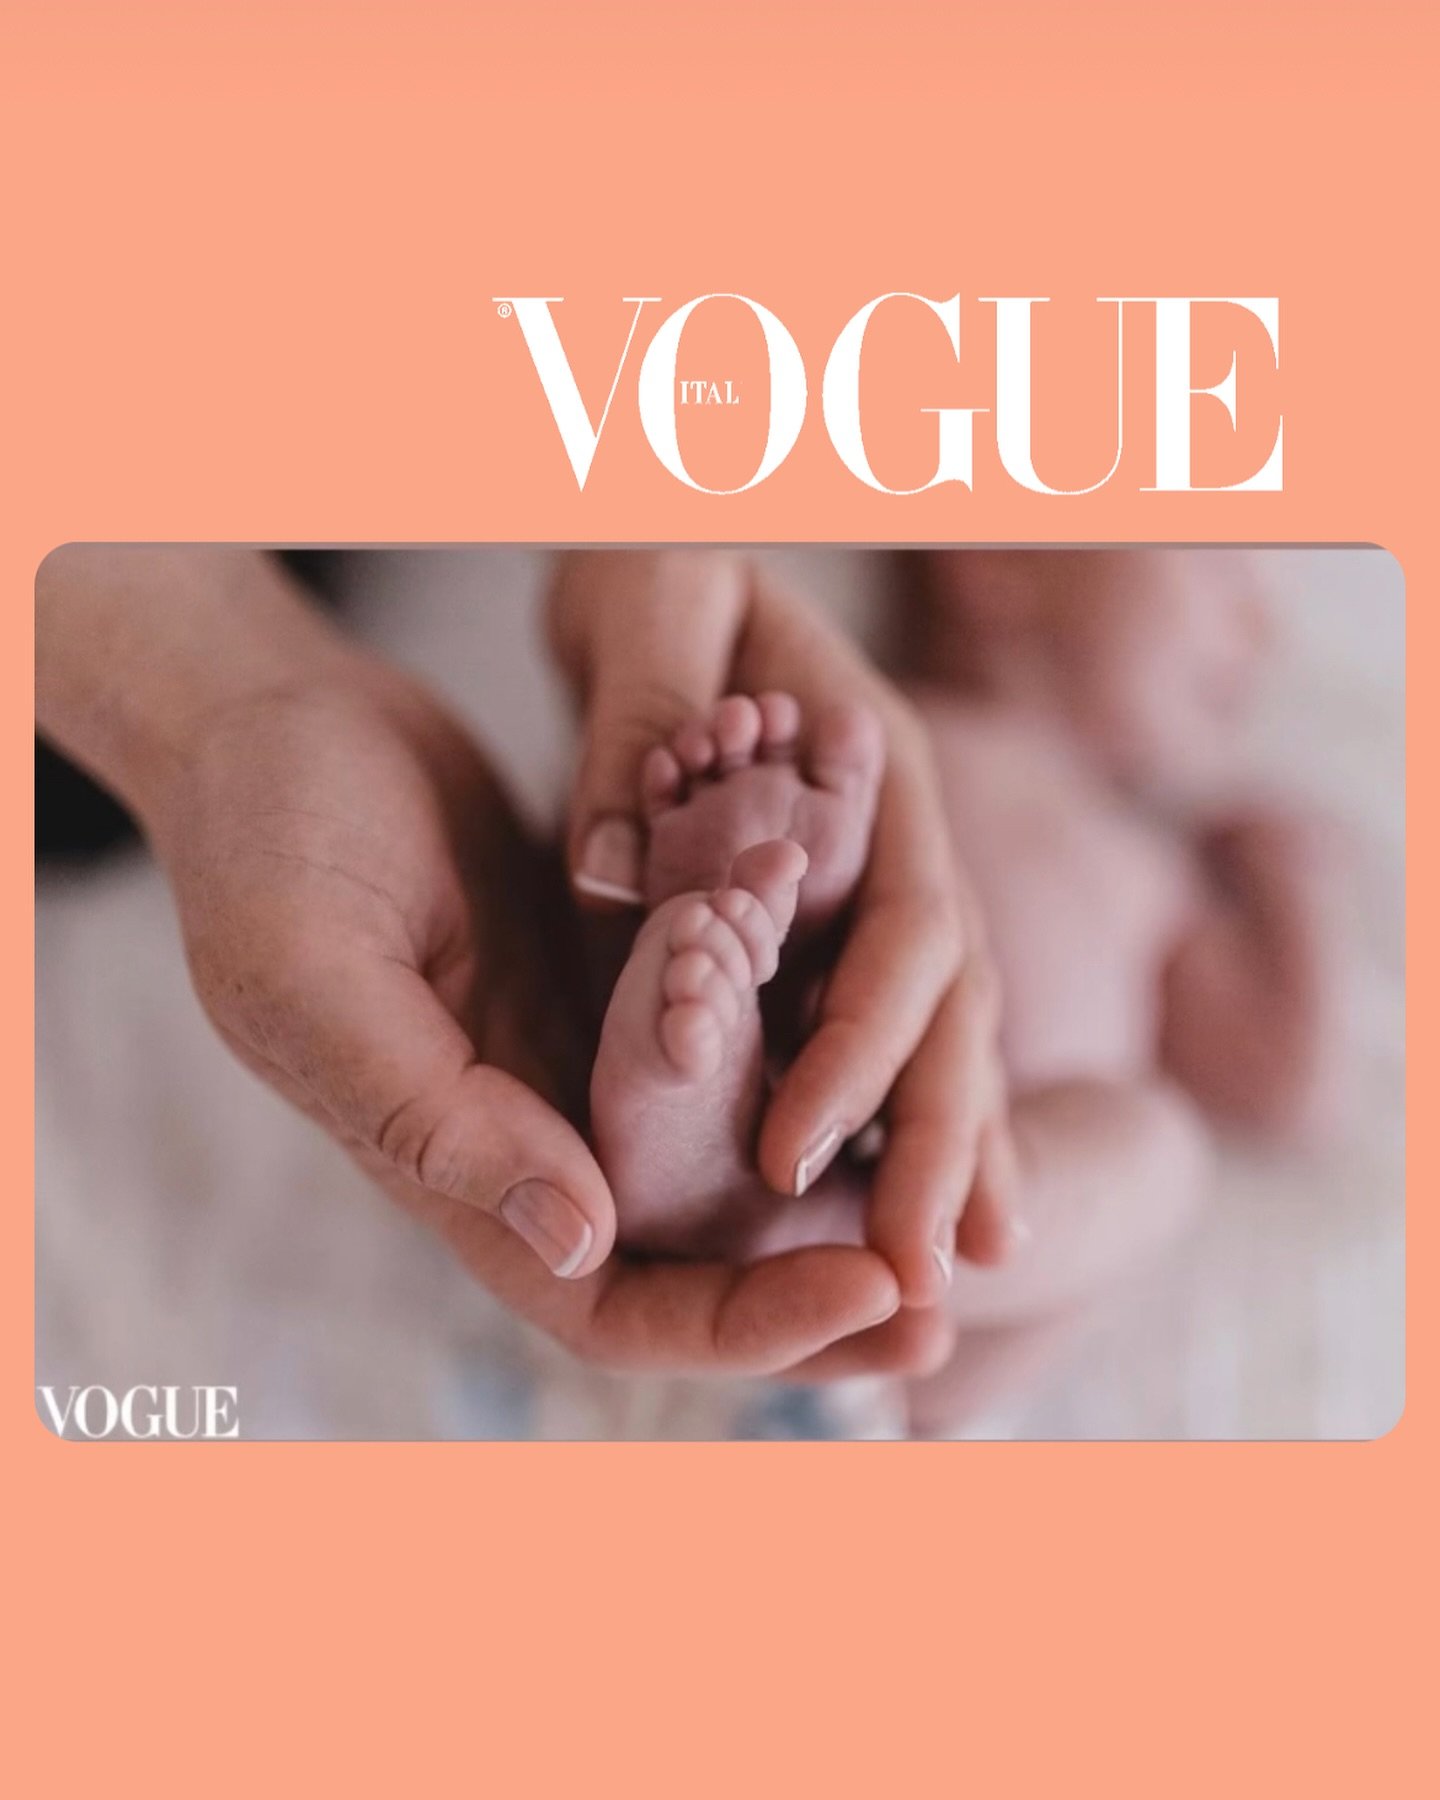 Capturing a newborn in all their tiny, squishy glory is like freezing a moment of pure magic. Those early days slip by so fast so a newborn shoot is like pressing pause on the whirlwind. Plus, who can resist those adorable, crinkly smiles and miniatu